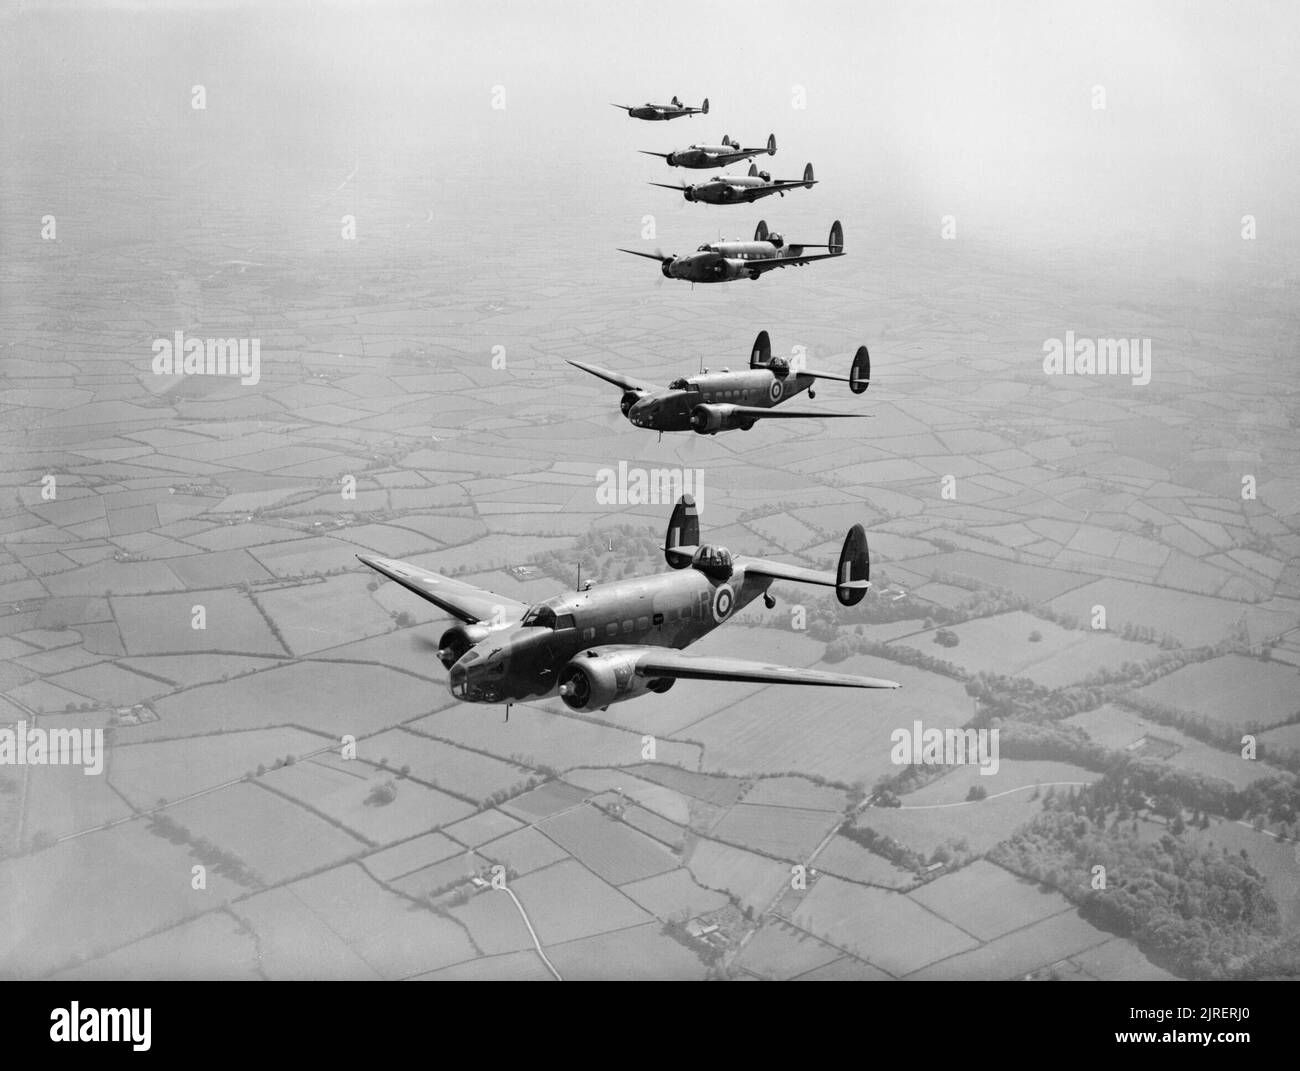 Lockheed Hudsons of No. 233 Squadron RAF based at Aldergrove in Northern Ireland, 30 May 1941. Lockheed Hudson Mark IIs and IIIs of No. 233 Squadron RAF based at Aldergrove, County Antrim, flying in starboard echelon formation over Northern Ireland. Stock Photo